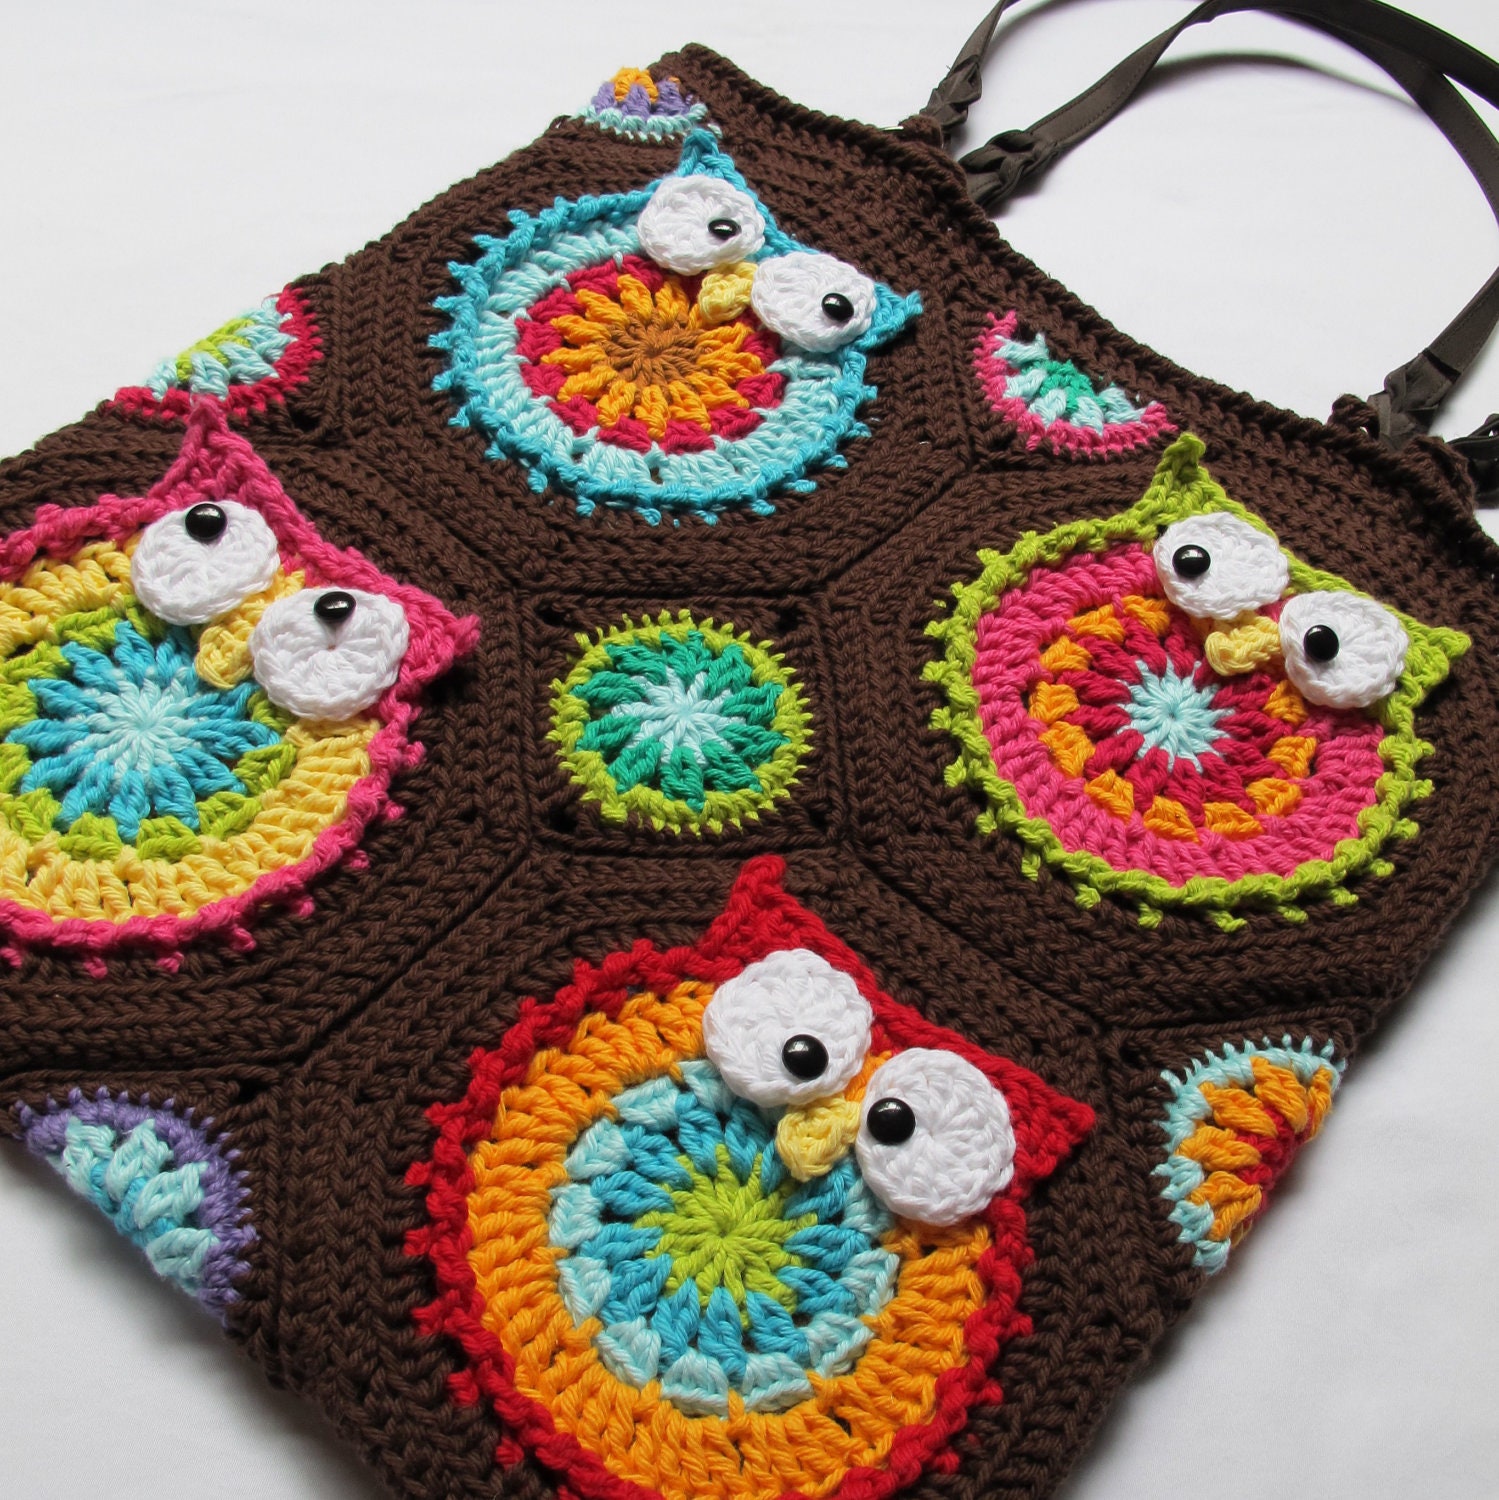 CROCHET PATTERN - Owl Tote'em - a CoLorFuL owl tote - Instant PDF Download - TheHatandI